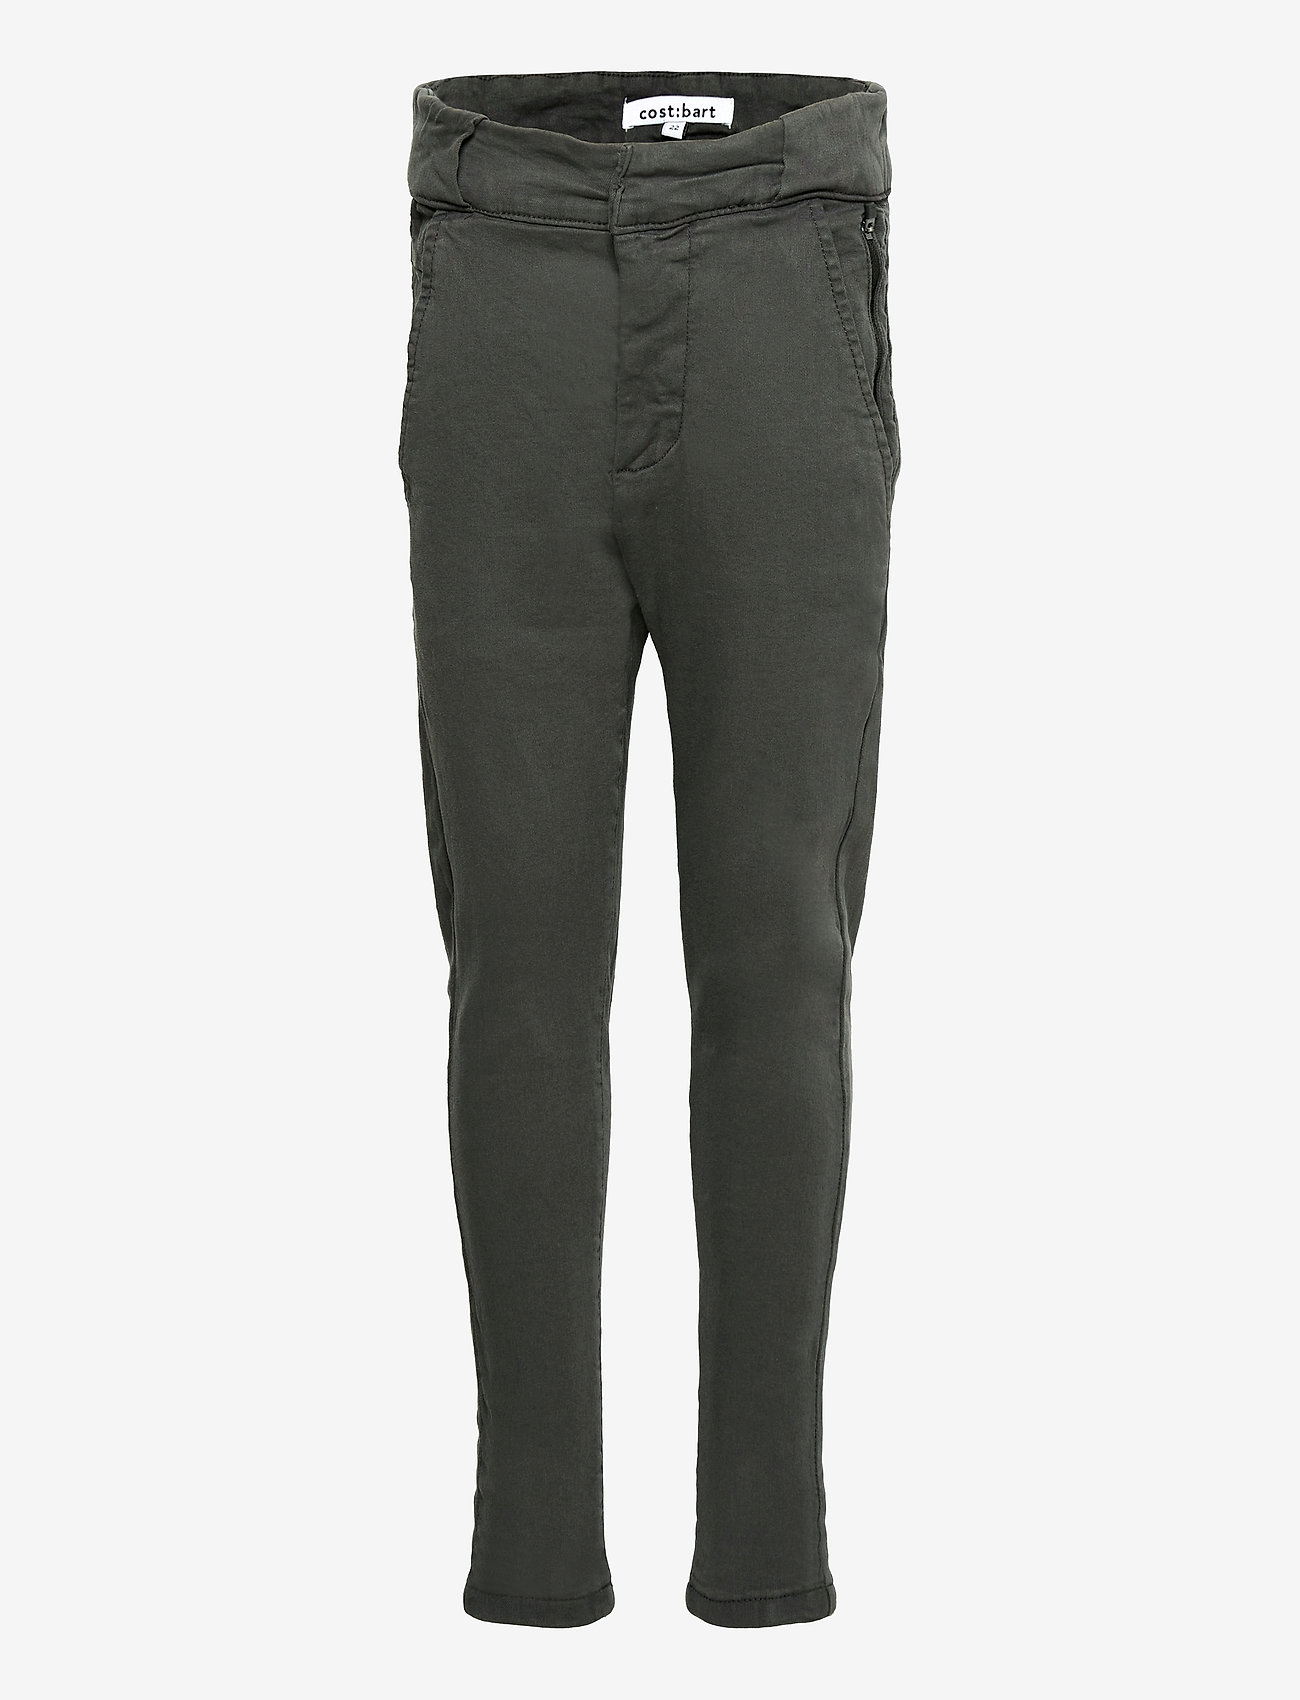 Costbart - NATE CHINO PANTS - gode sommertilbud - grey - 0